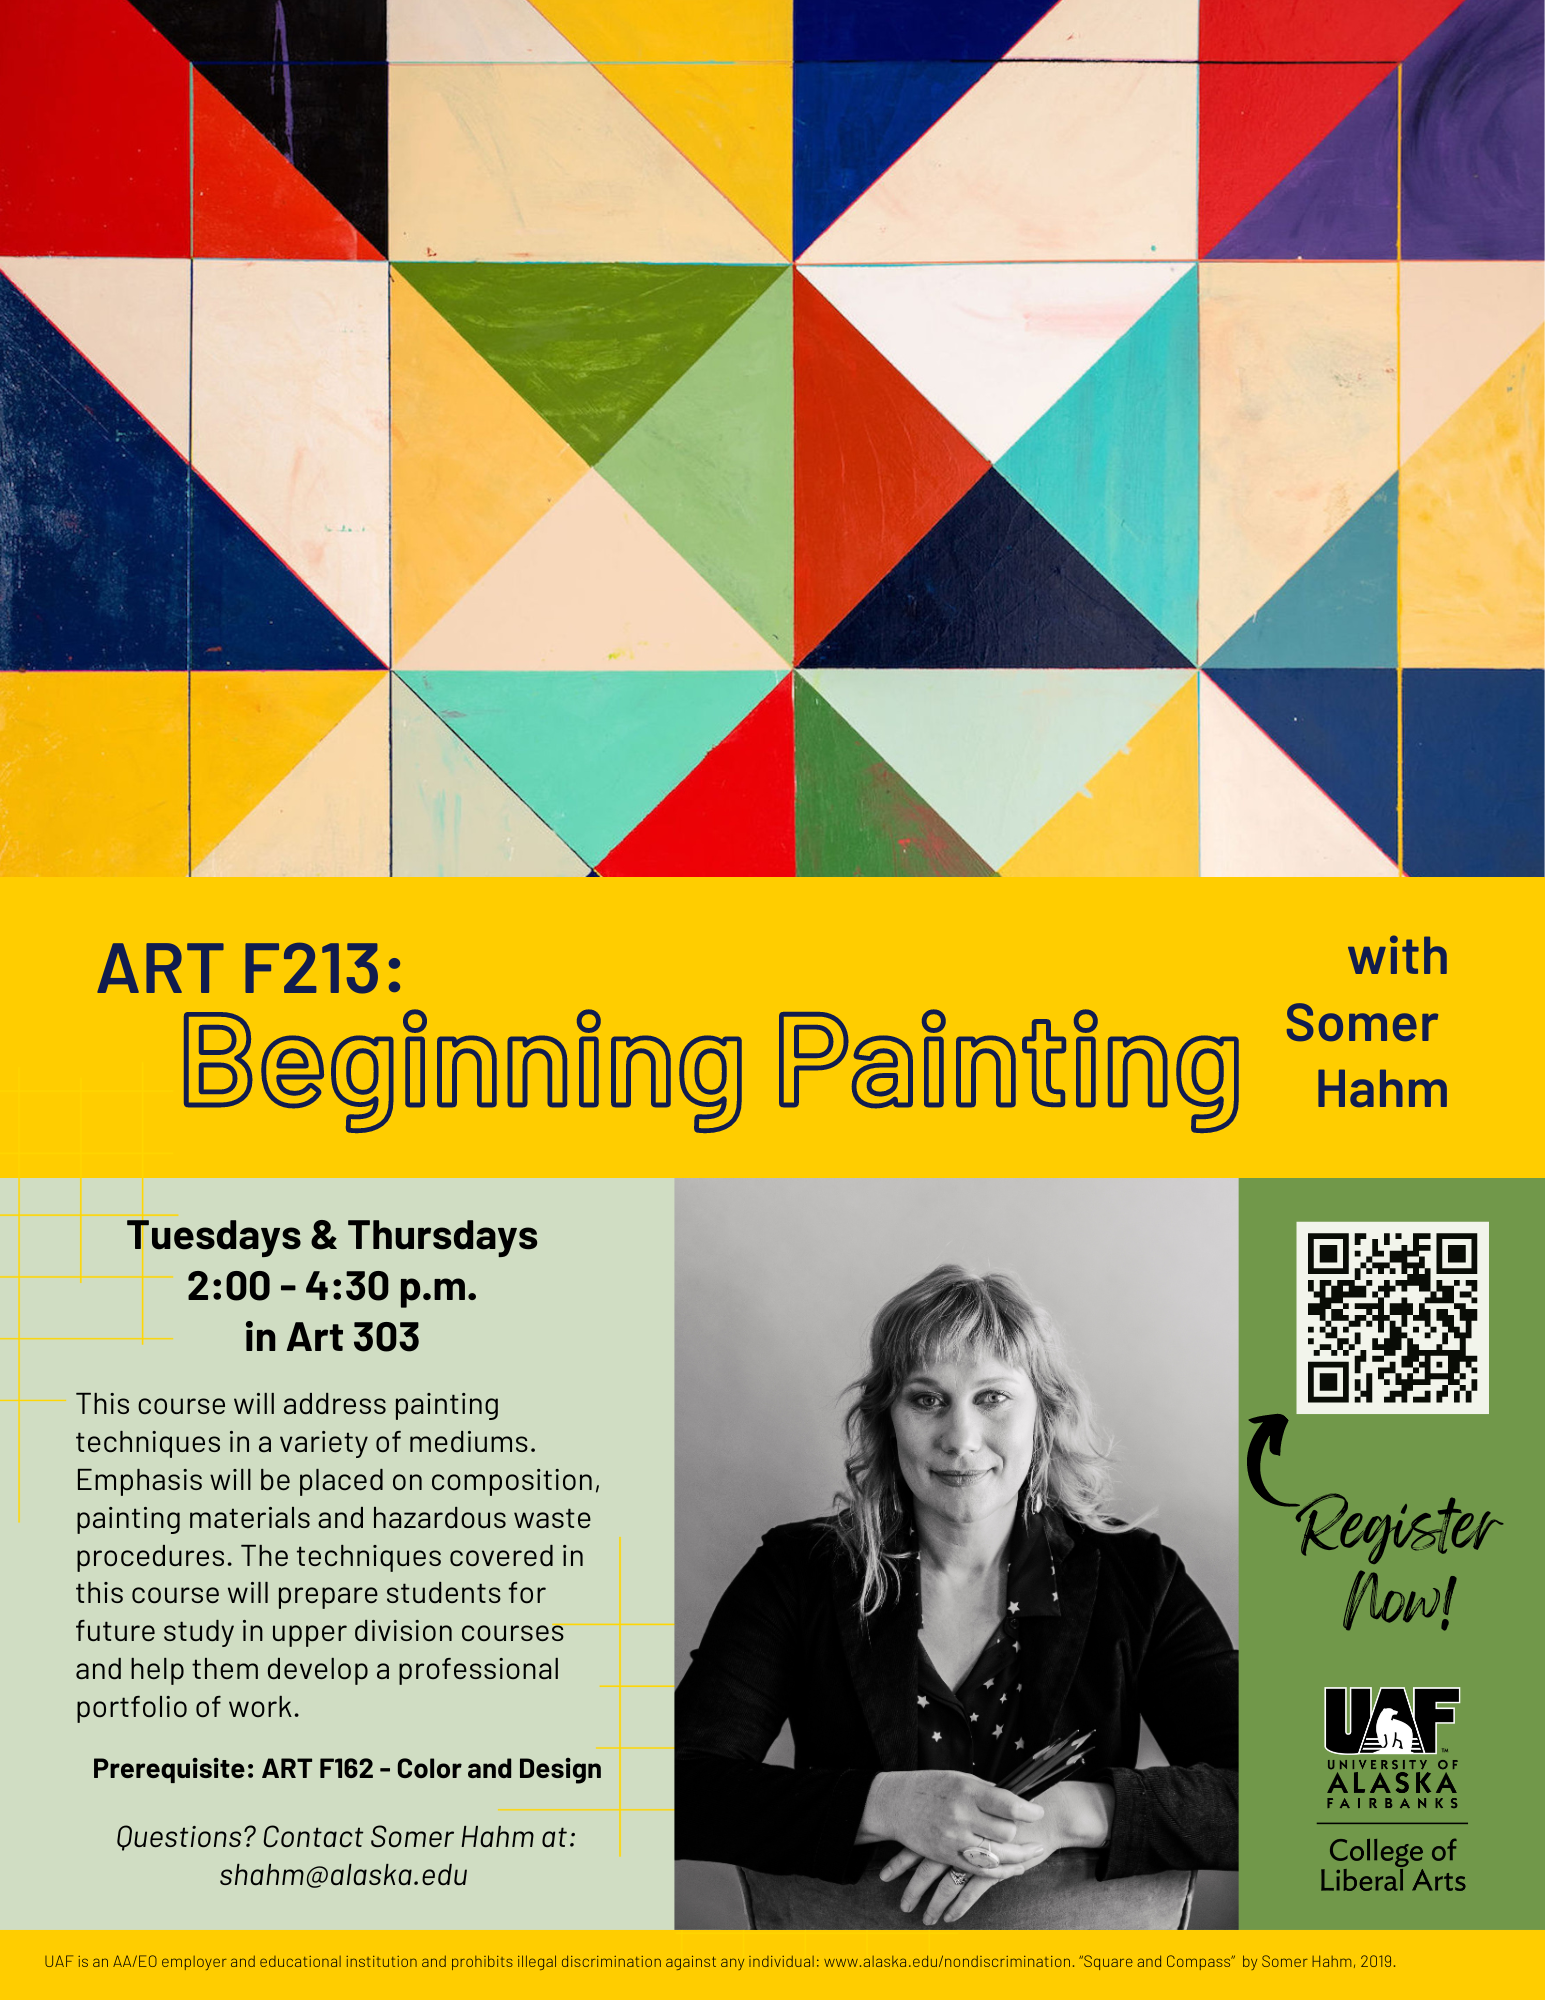 Poster advertising ART F213: Beginning Painting with Somer Hahm. UAF image